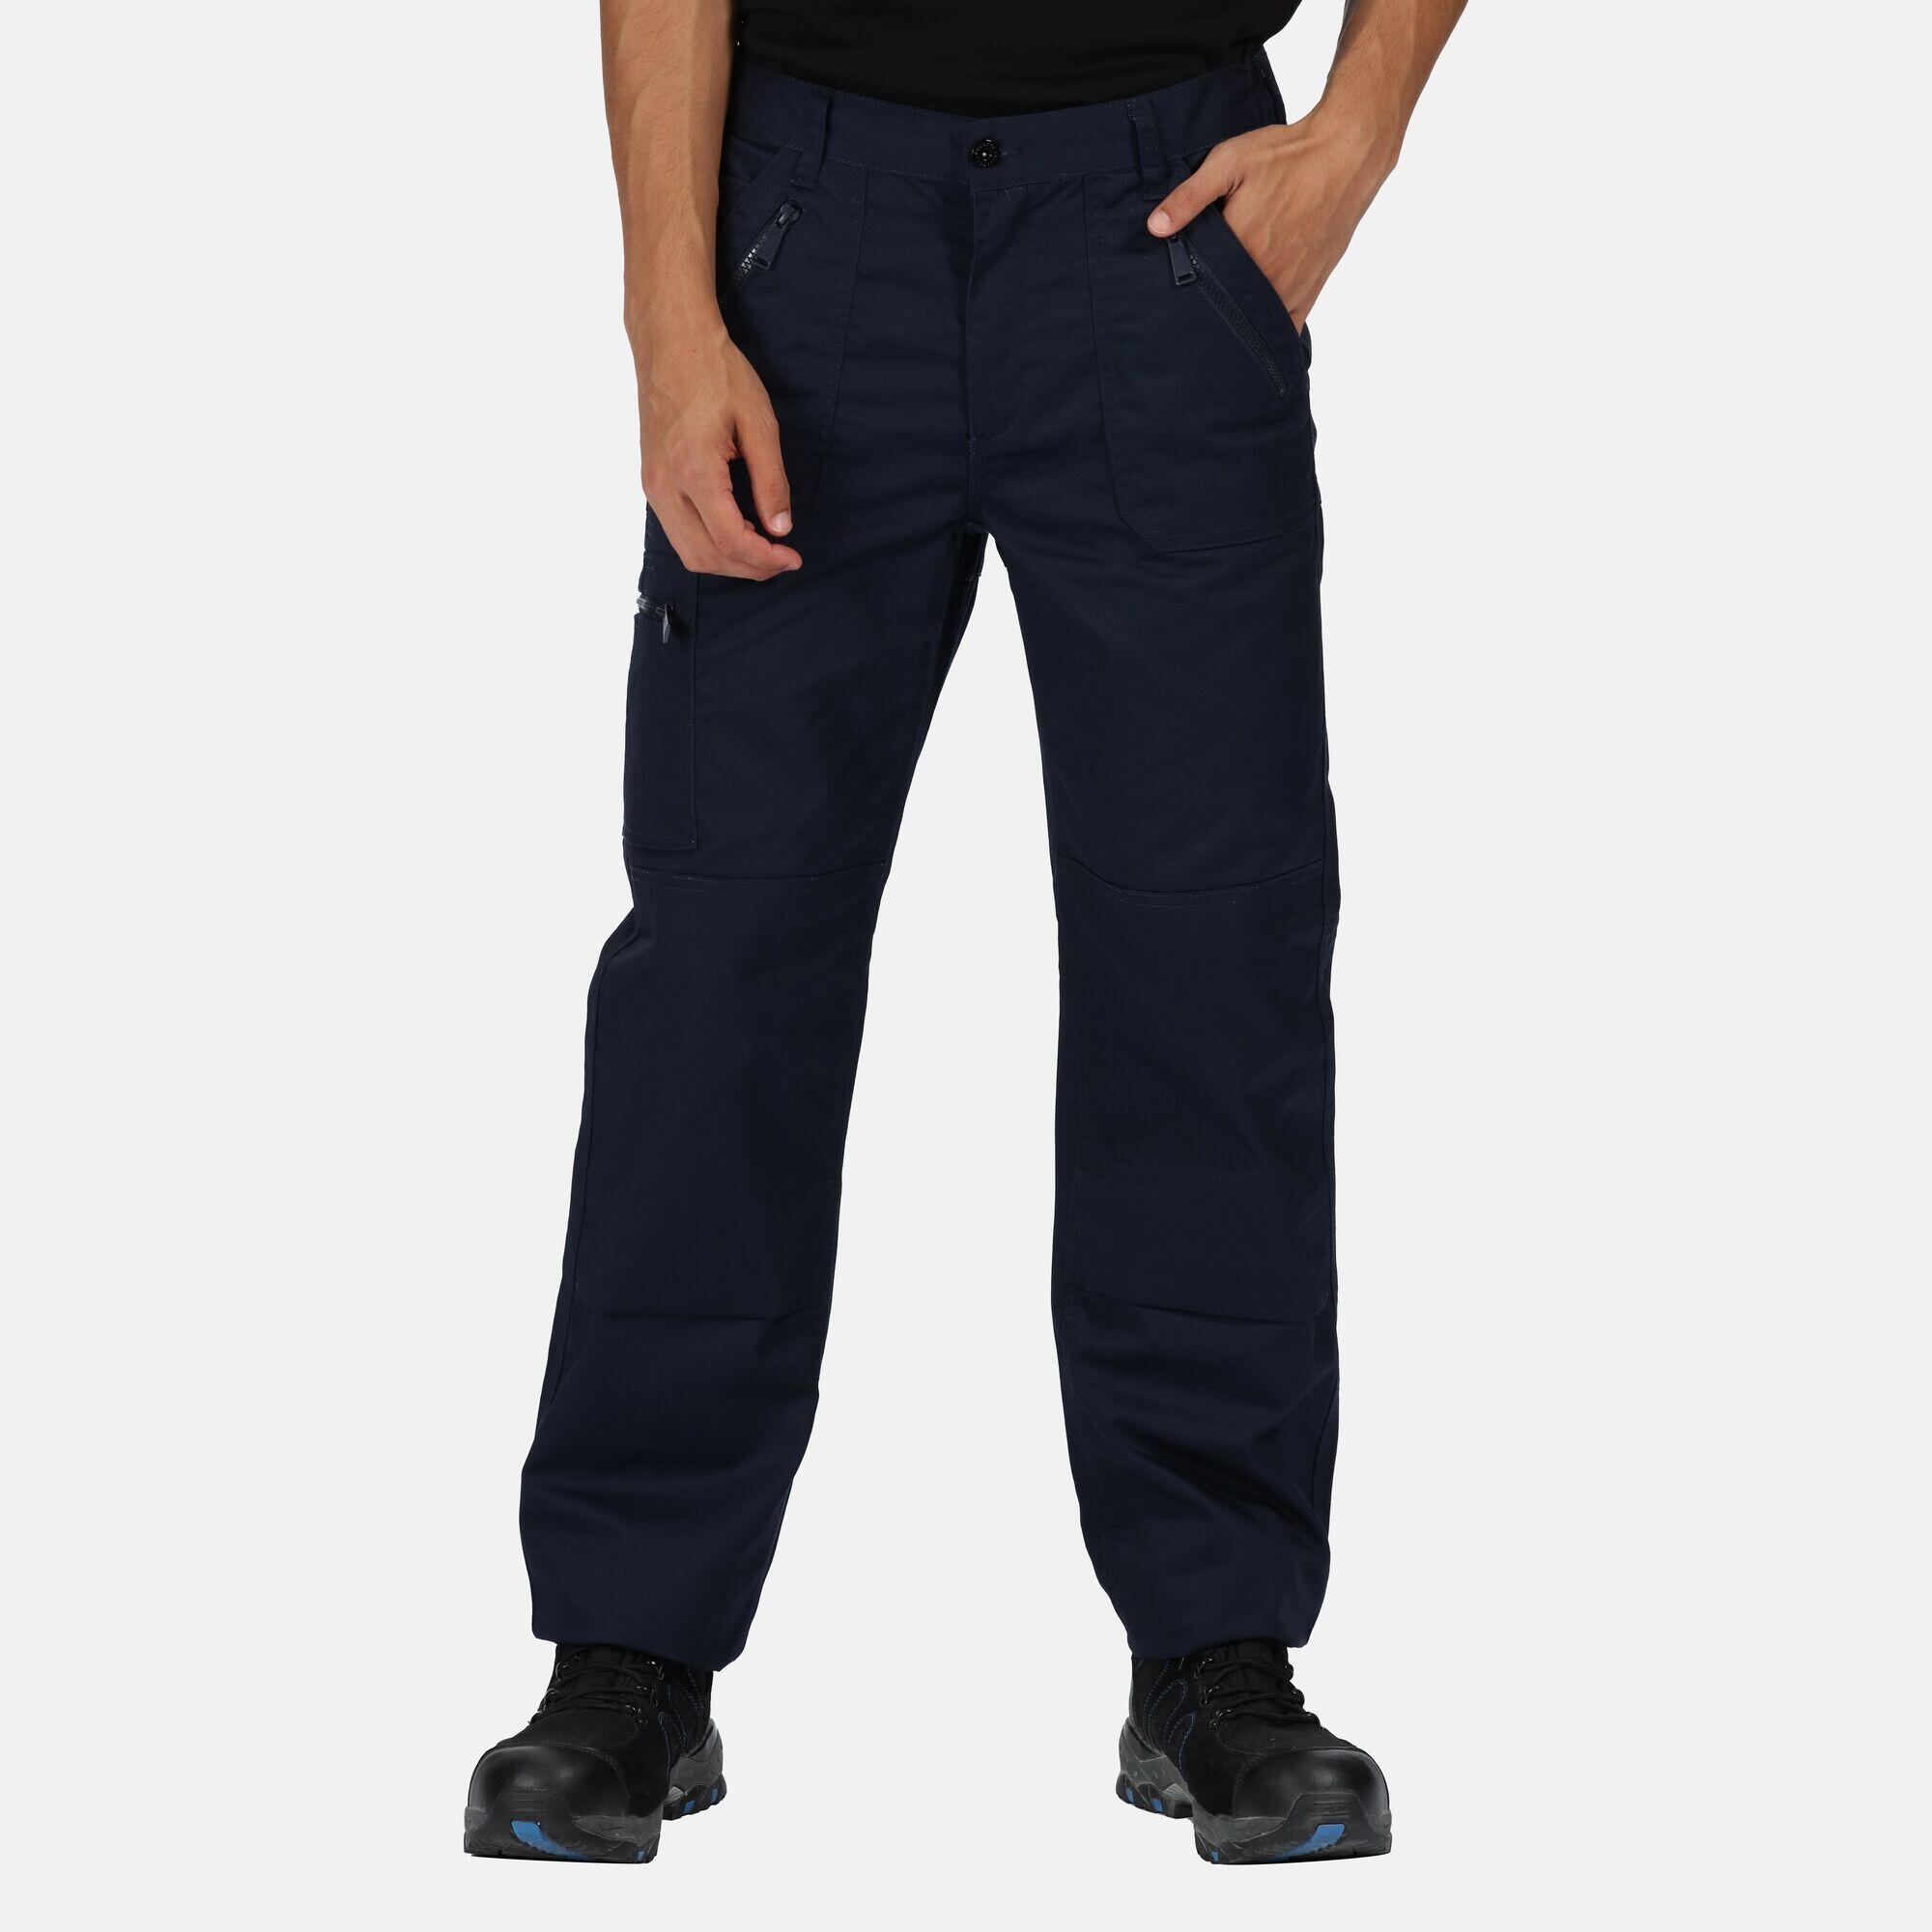 Mens Pro Action Waterproof Trousers Long (34in) (Navy) 4/5